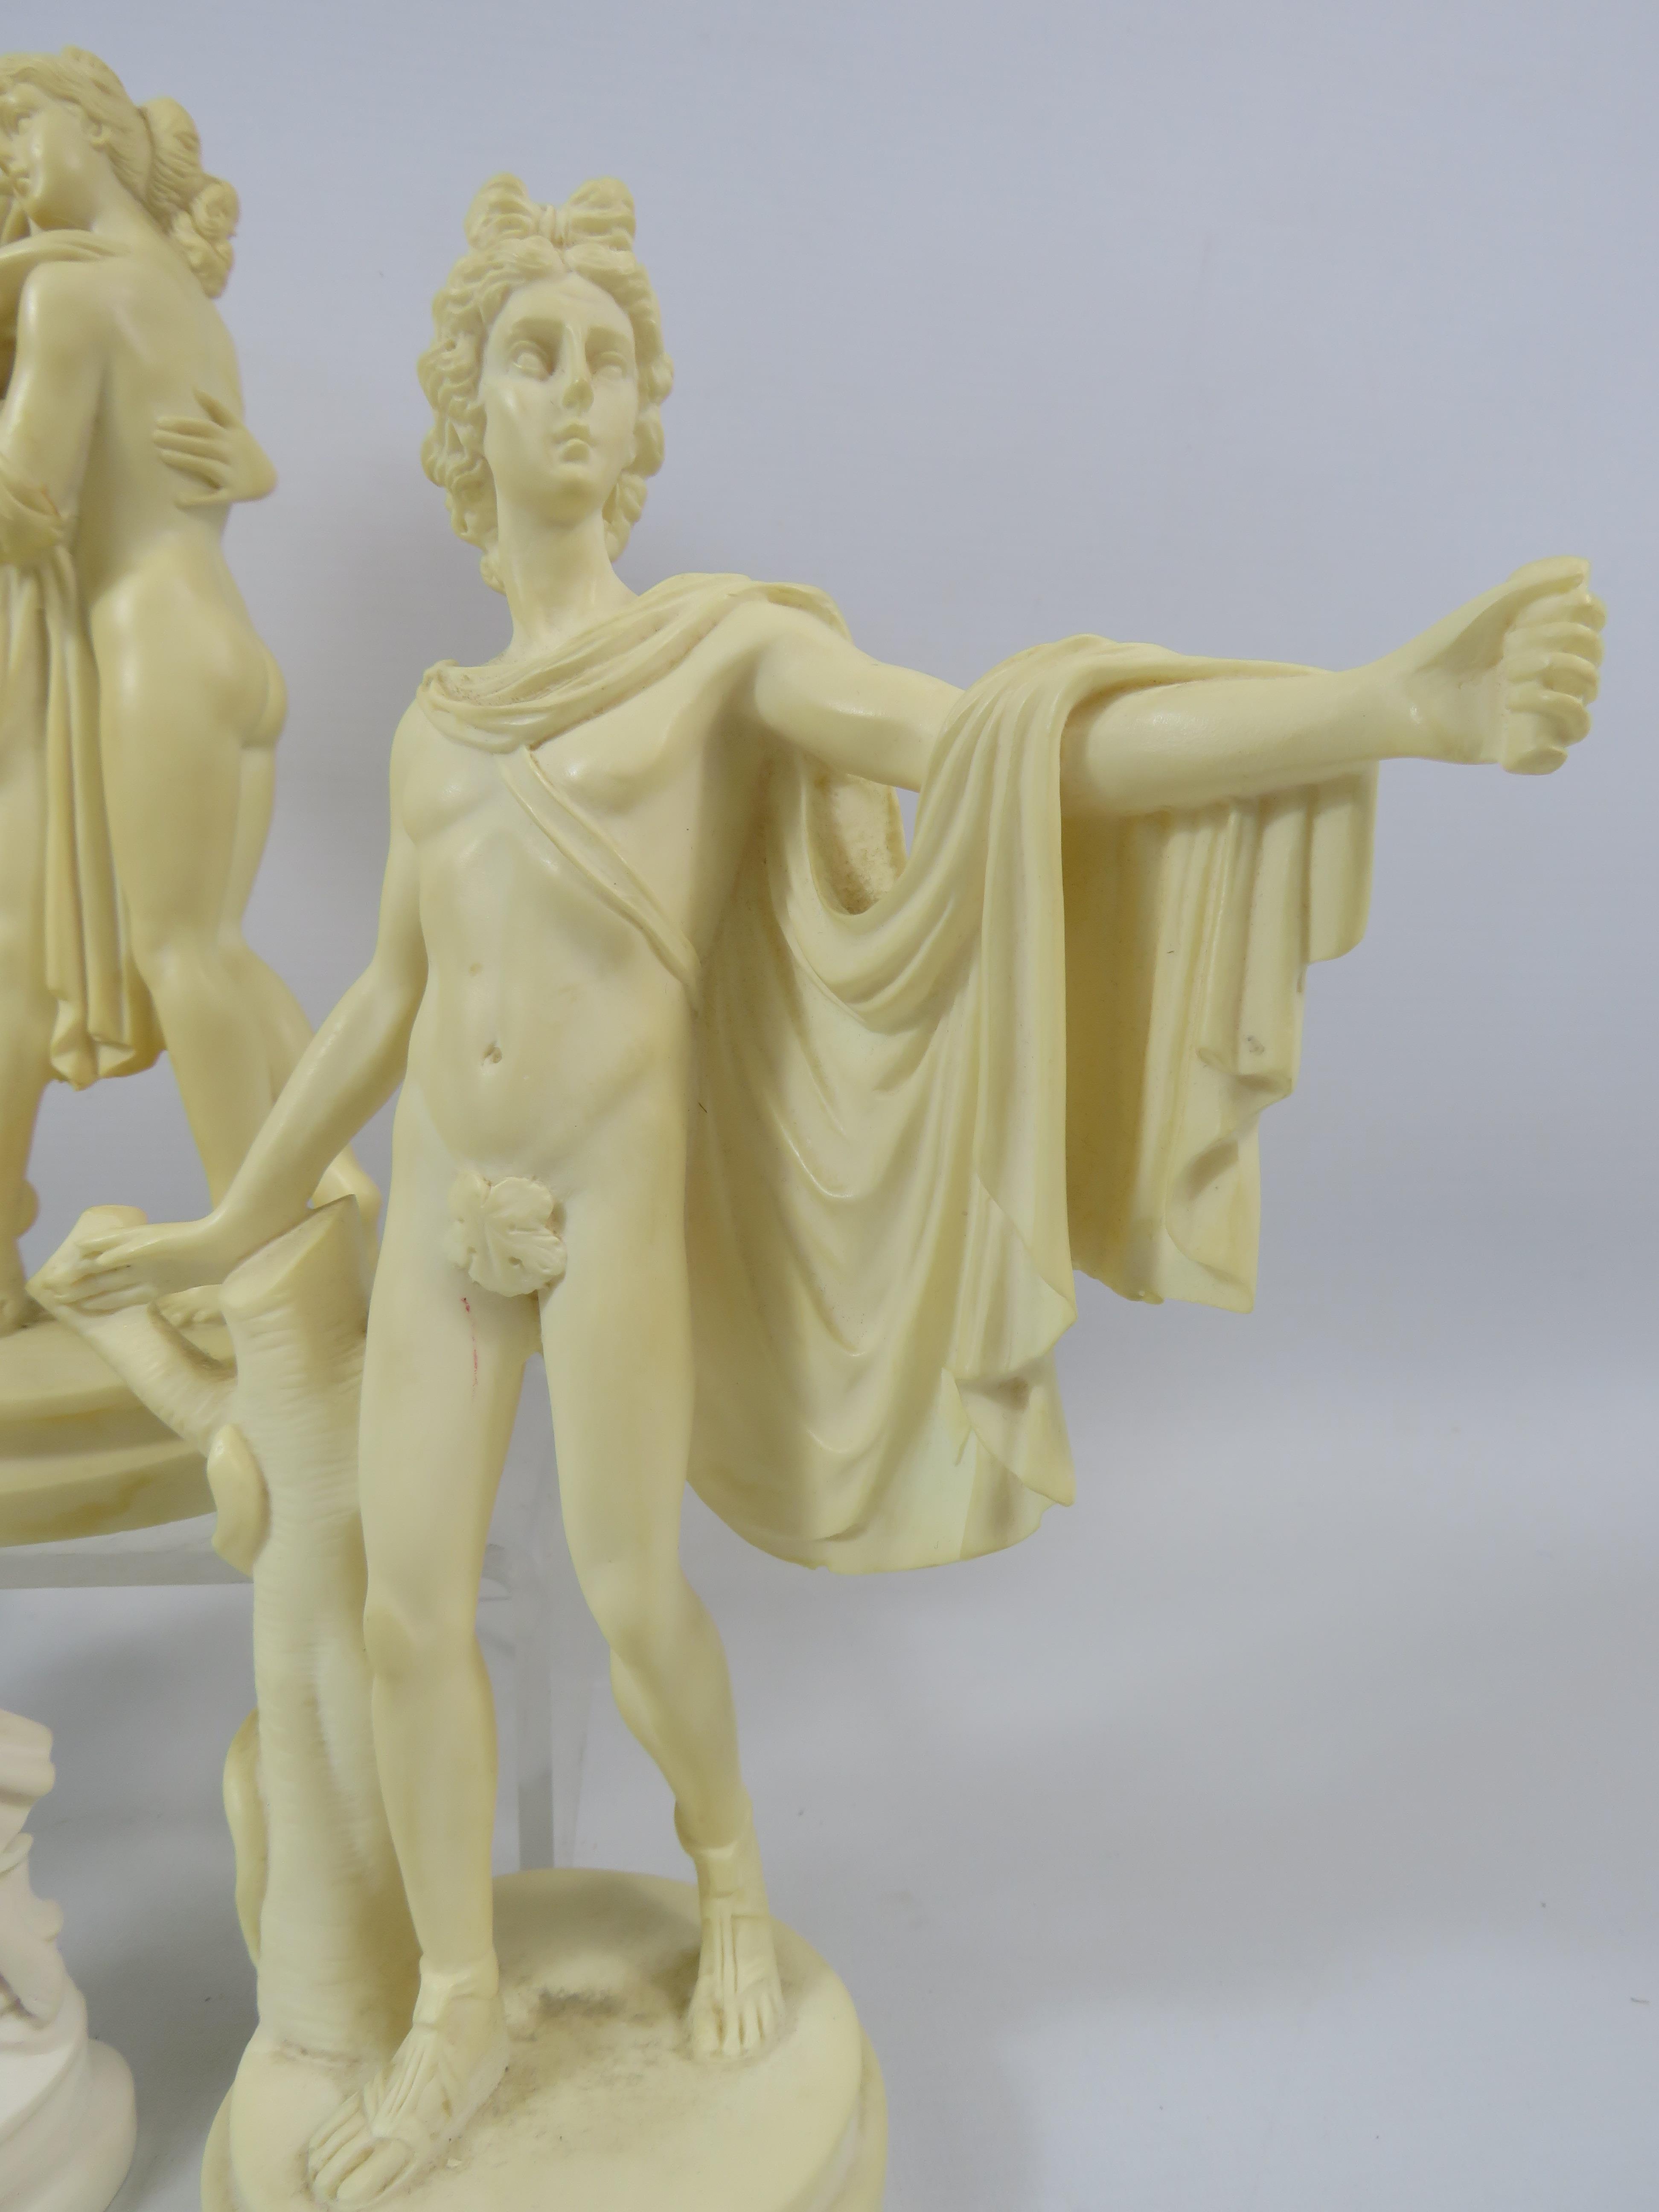 Selection of neoclassical greek style figurines the tallest is approx 10" tall. - Image 3 of 5